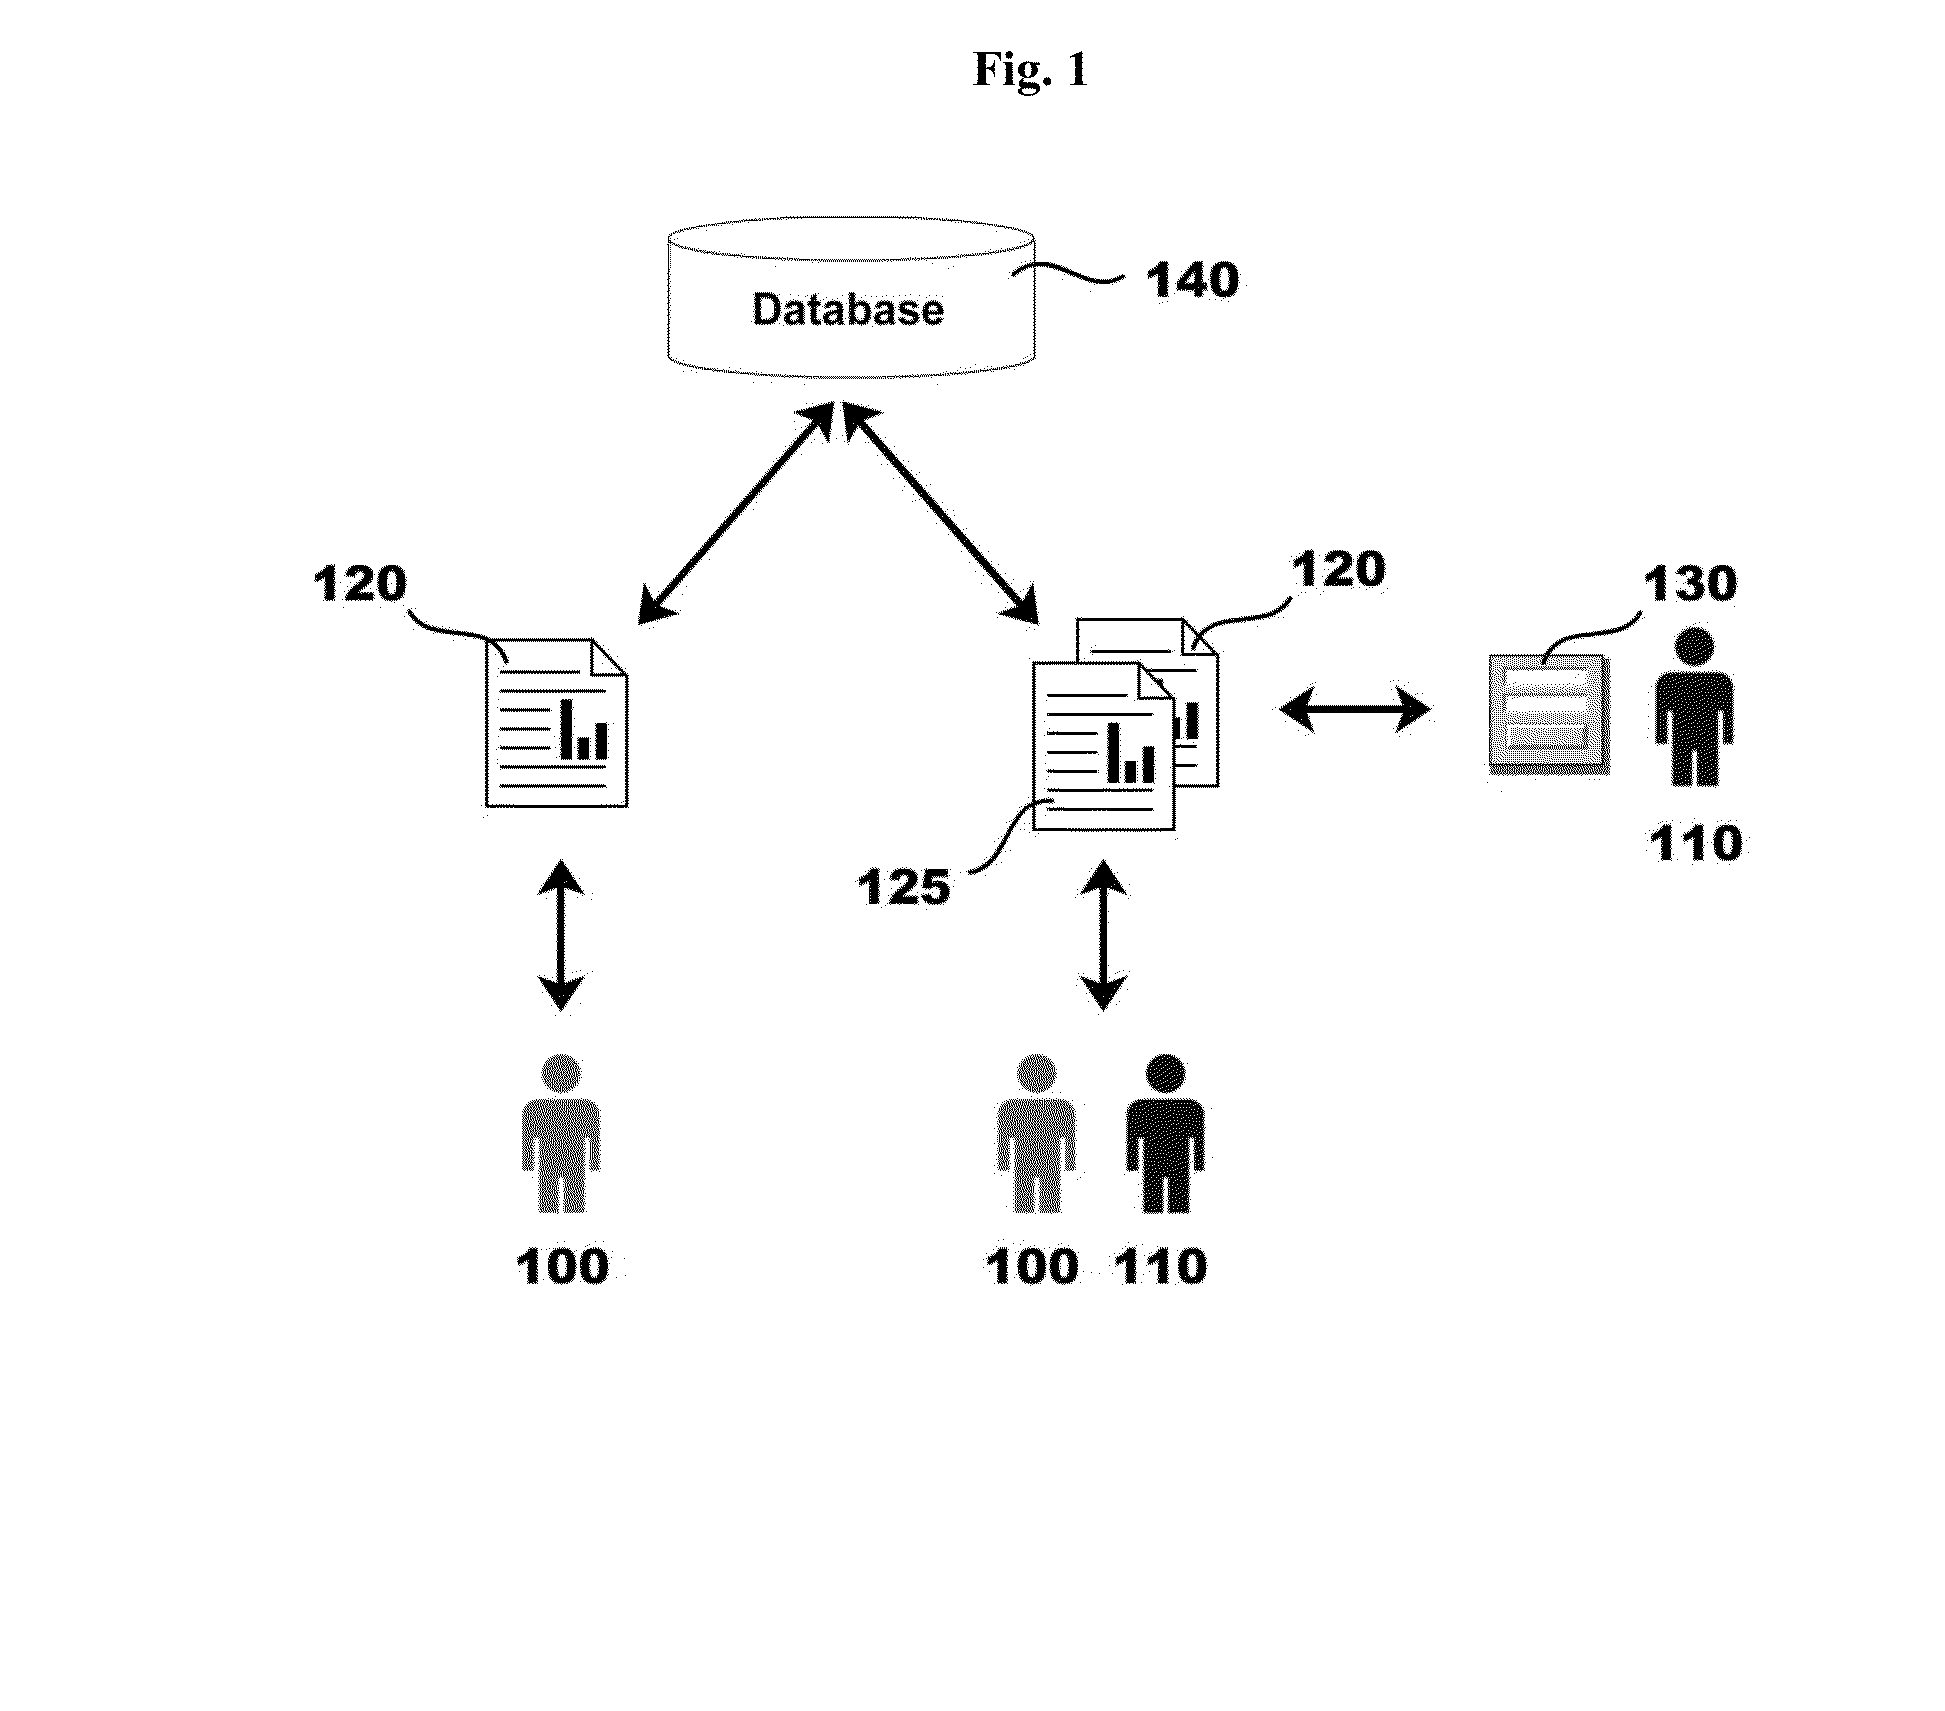 Bimodal computer-based system for selling financial products